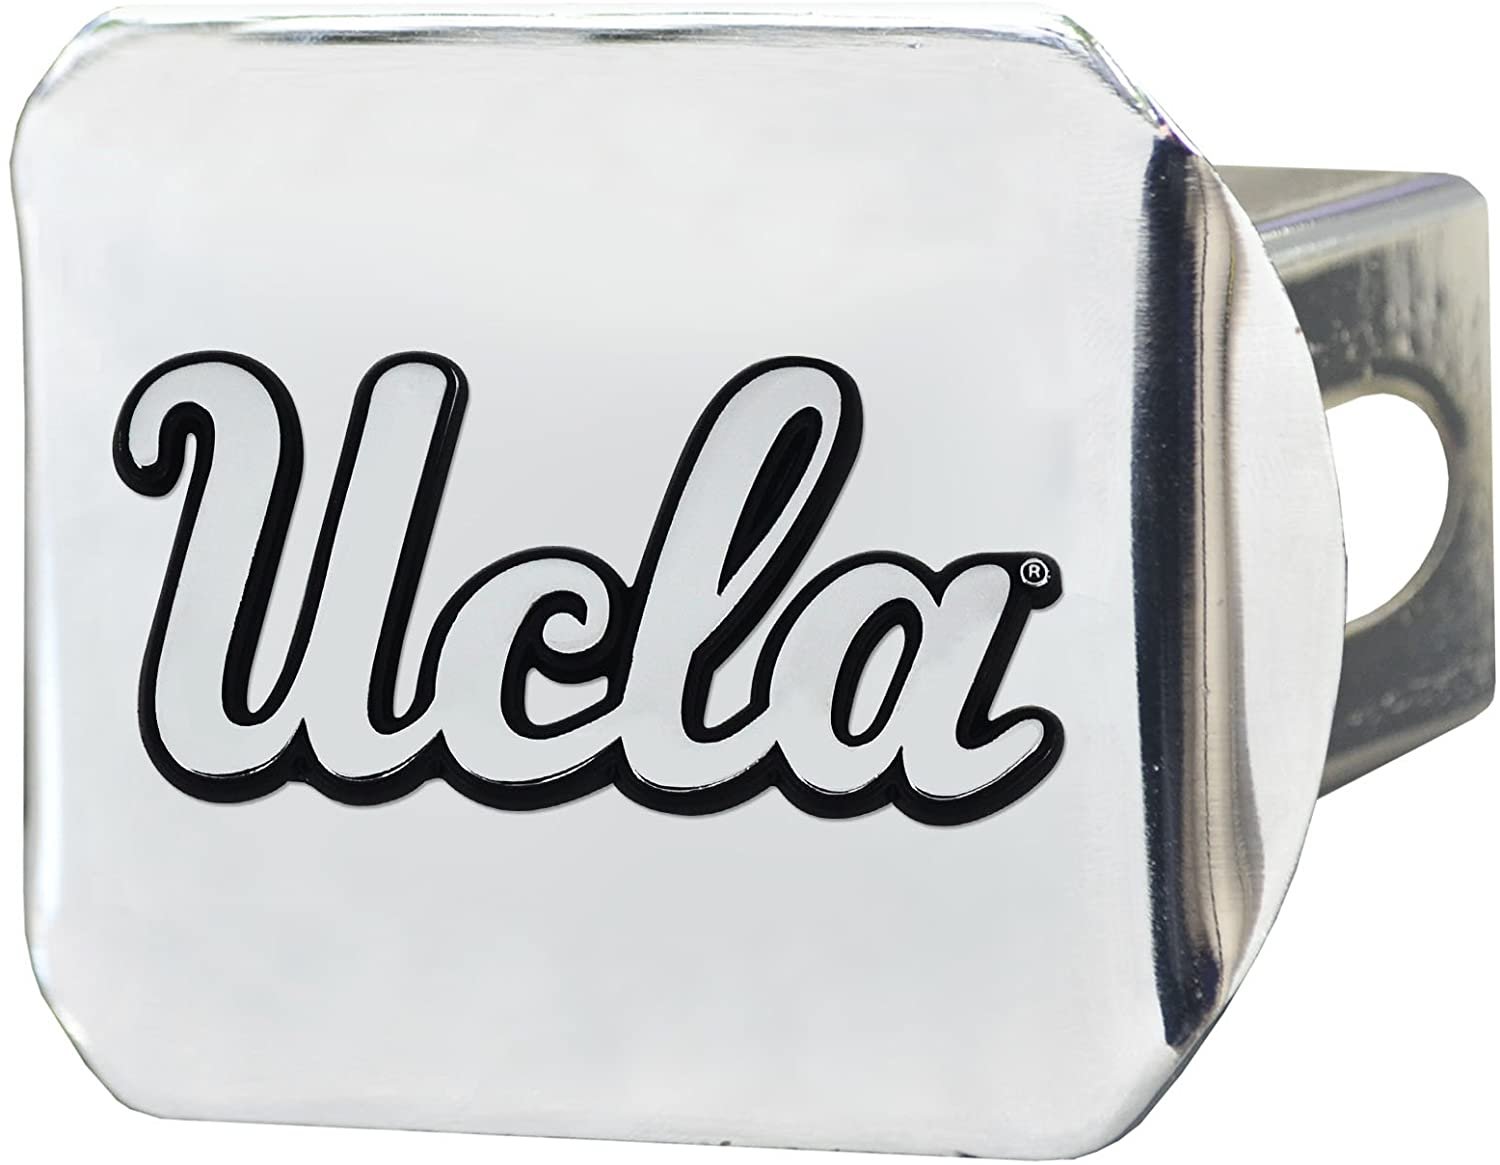 UCLA Bruins Hitch Cover Solid Metal with Chrome Metal Emblem 2" Square Type III University of California Los Angeles